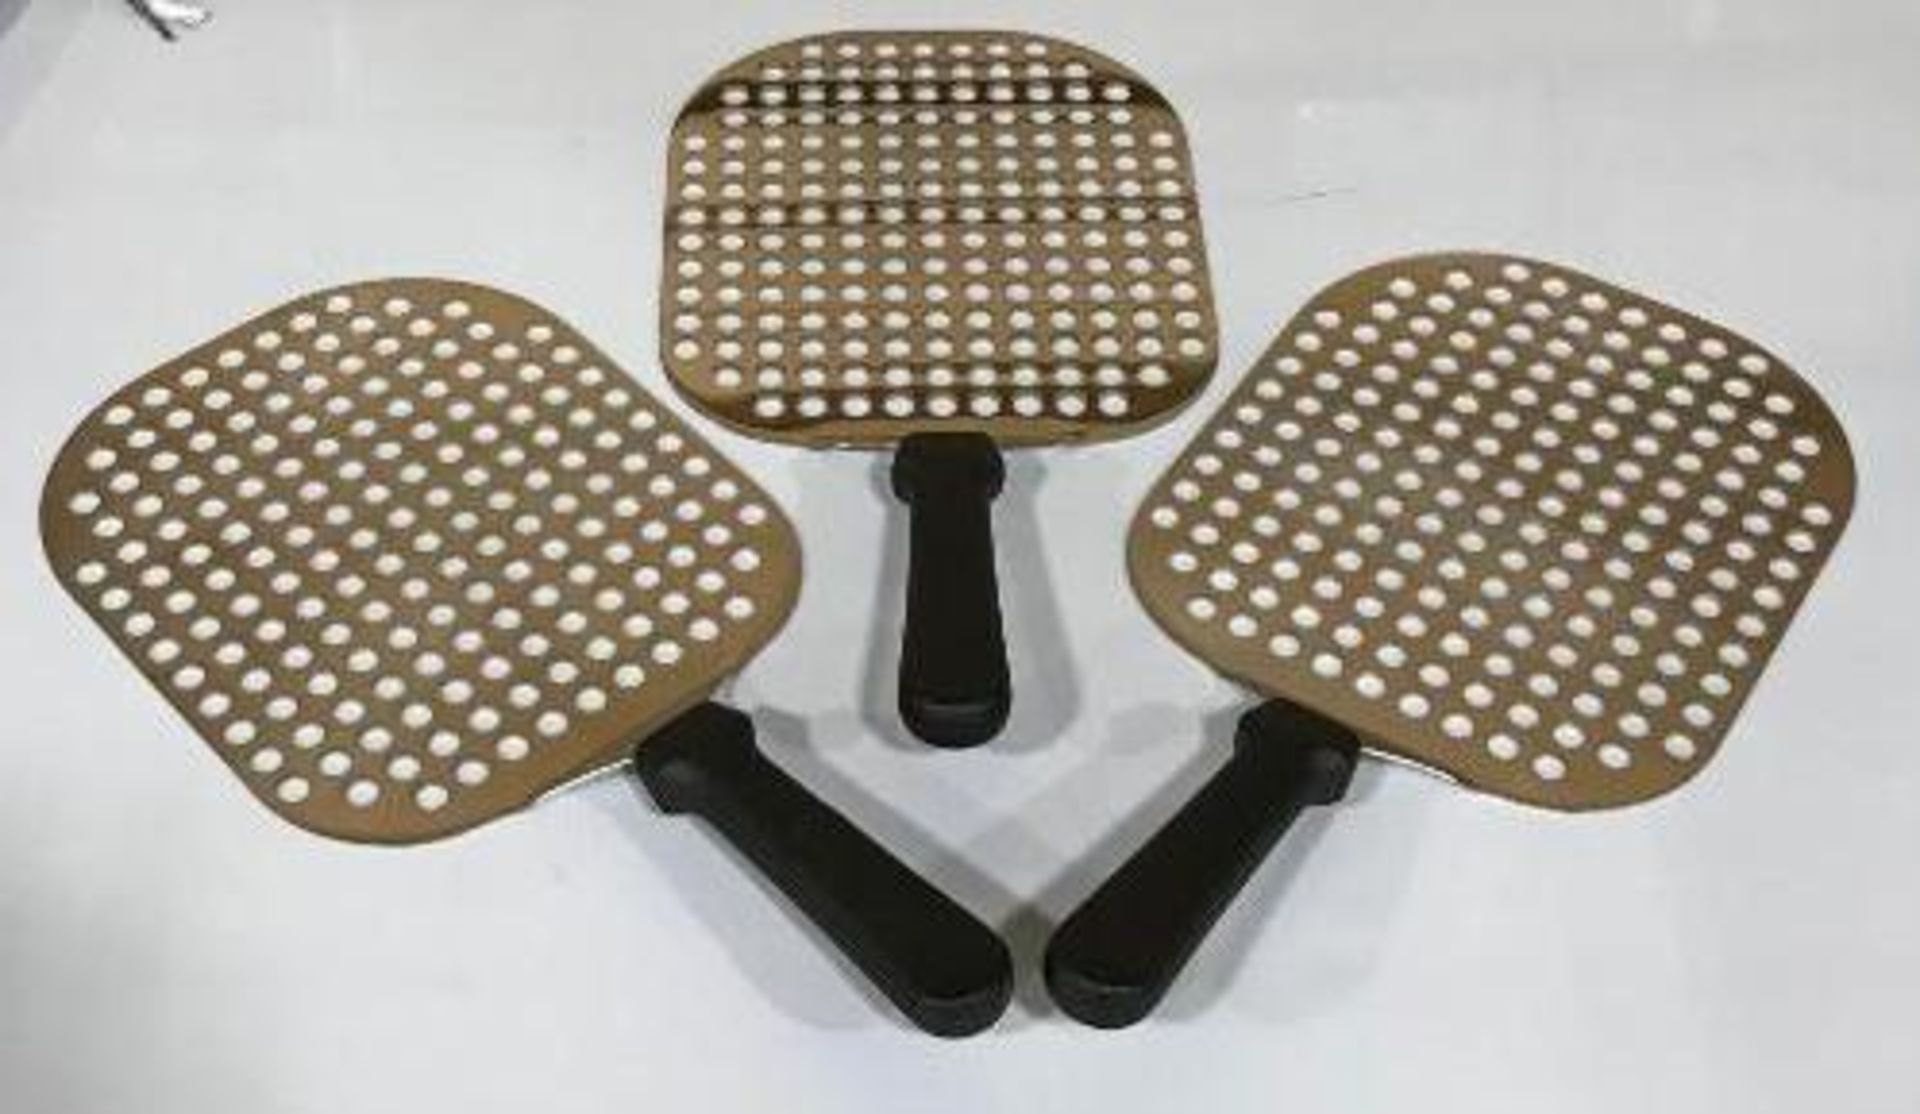 EURO PIZZA SERVERS, STAINLESS STEEL, PERFORATED, BROWNE 575334 - LOT OF 3 - NEW - Image 2 of 2